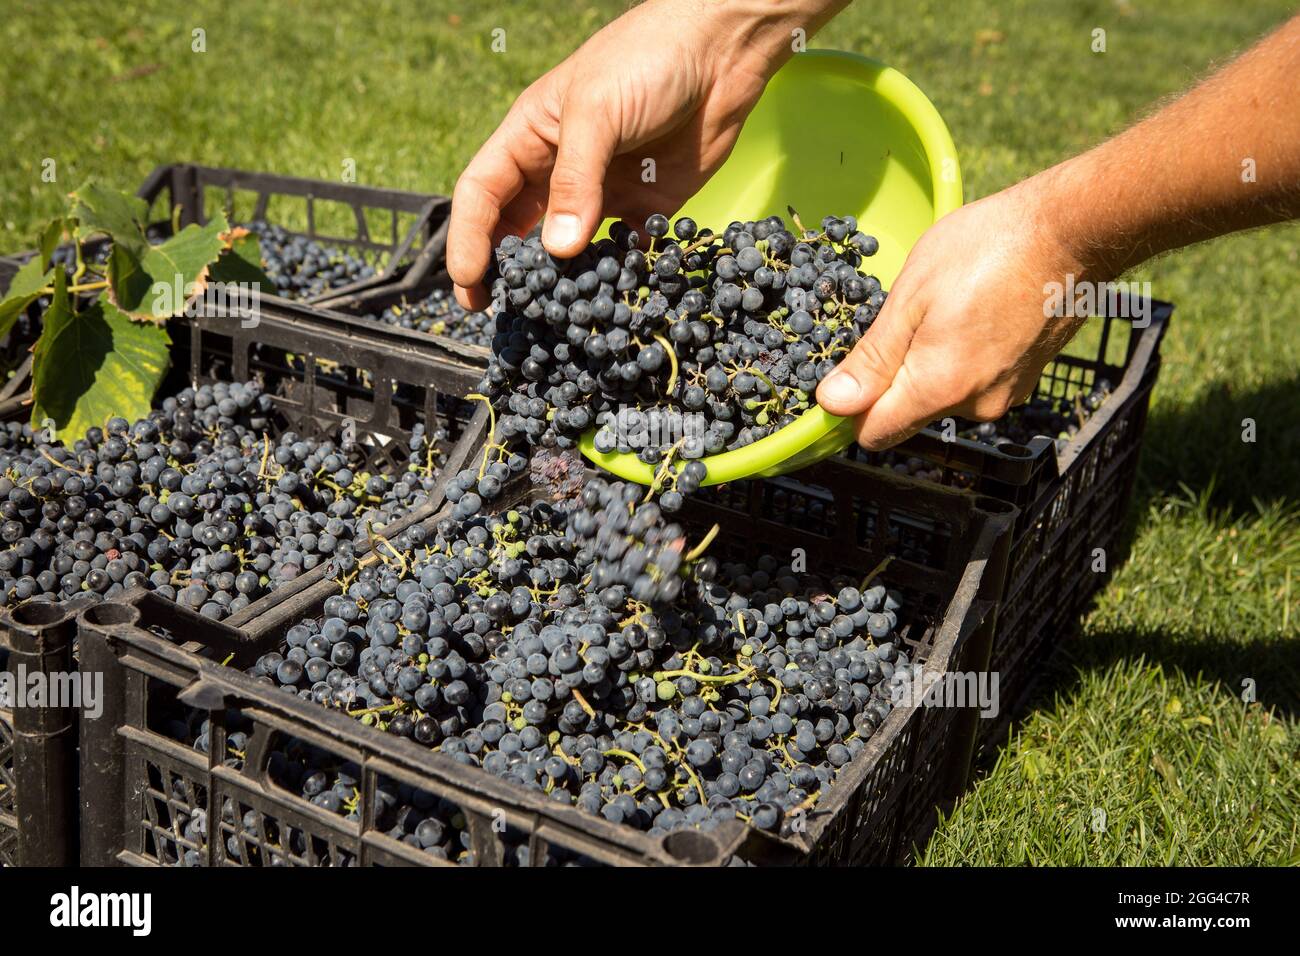 Grape harvest. The fruits collected by hand are laid out in a container. Wine grapes are collected in boxes. Autumn is the time of grape harvest and w Stock Photo